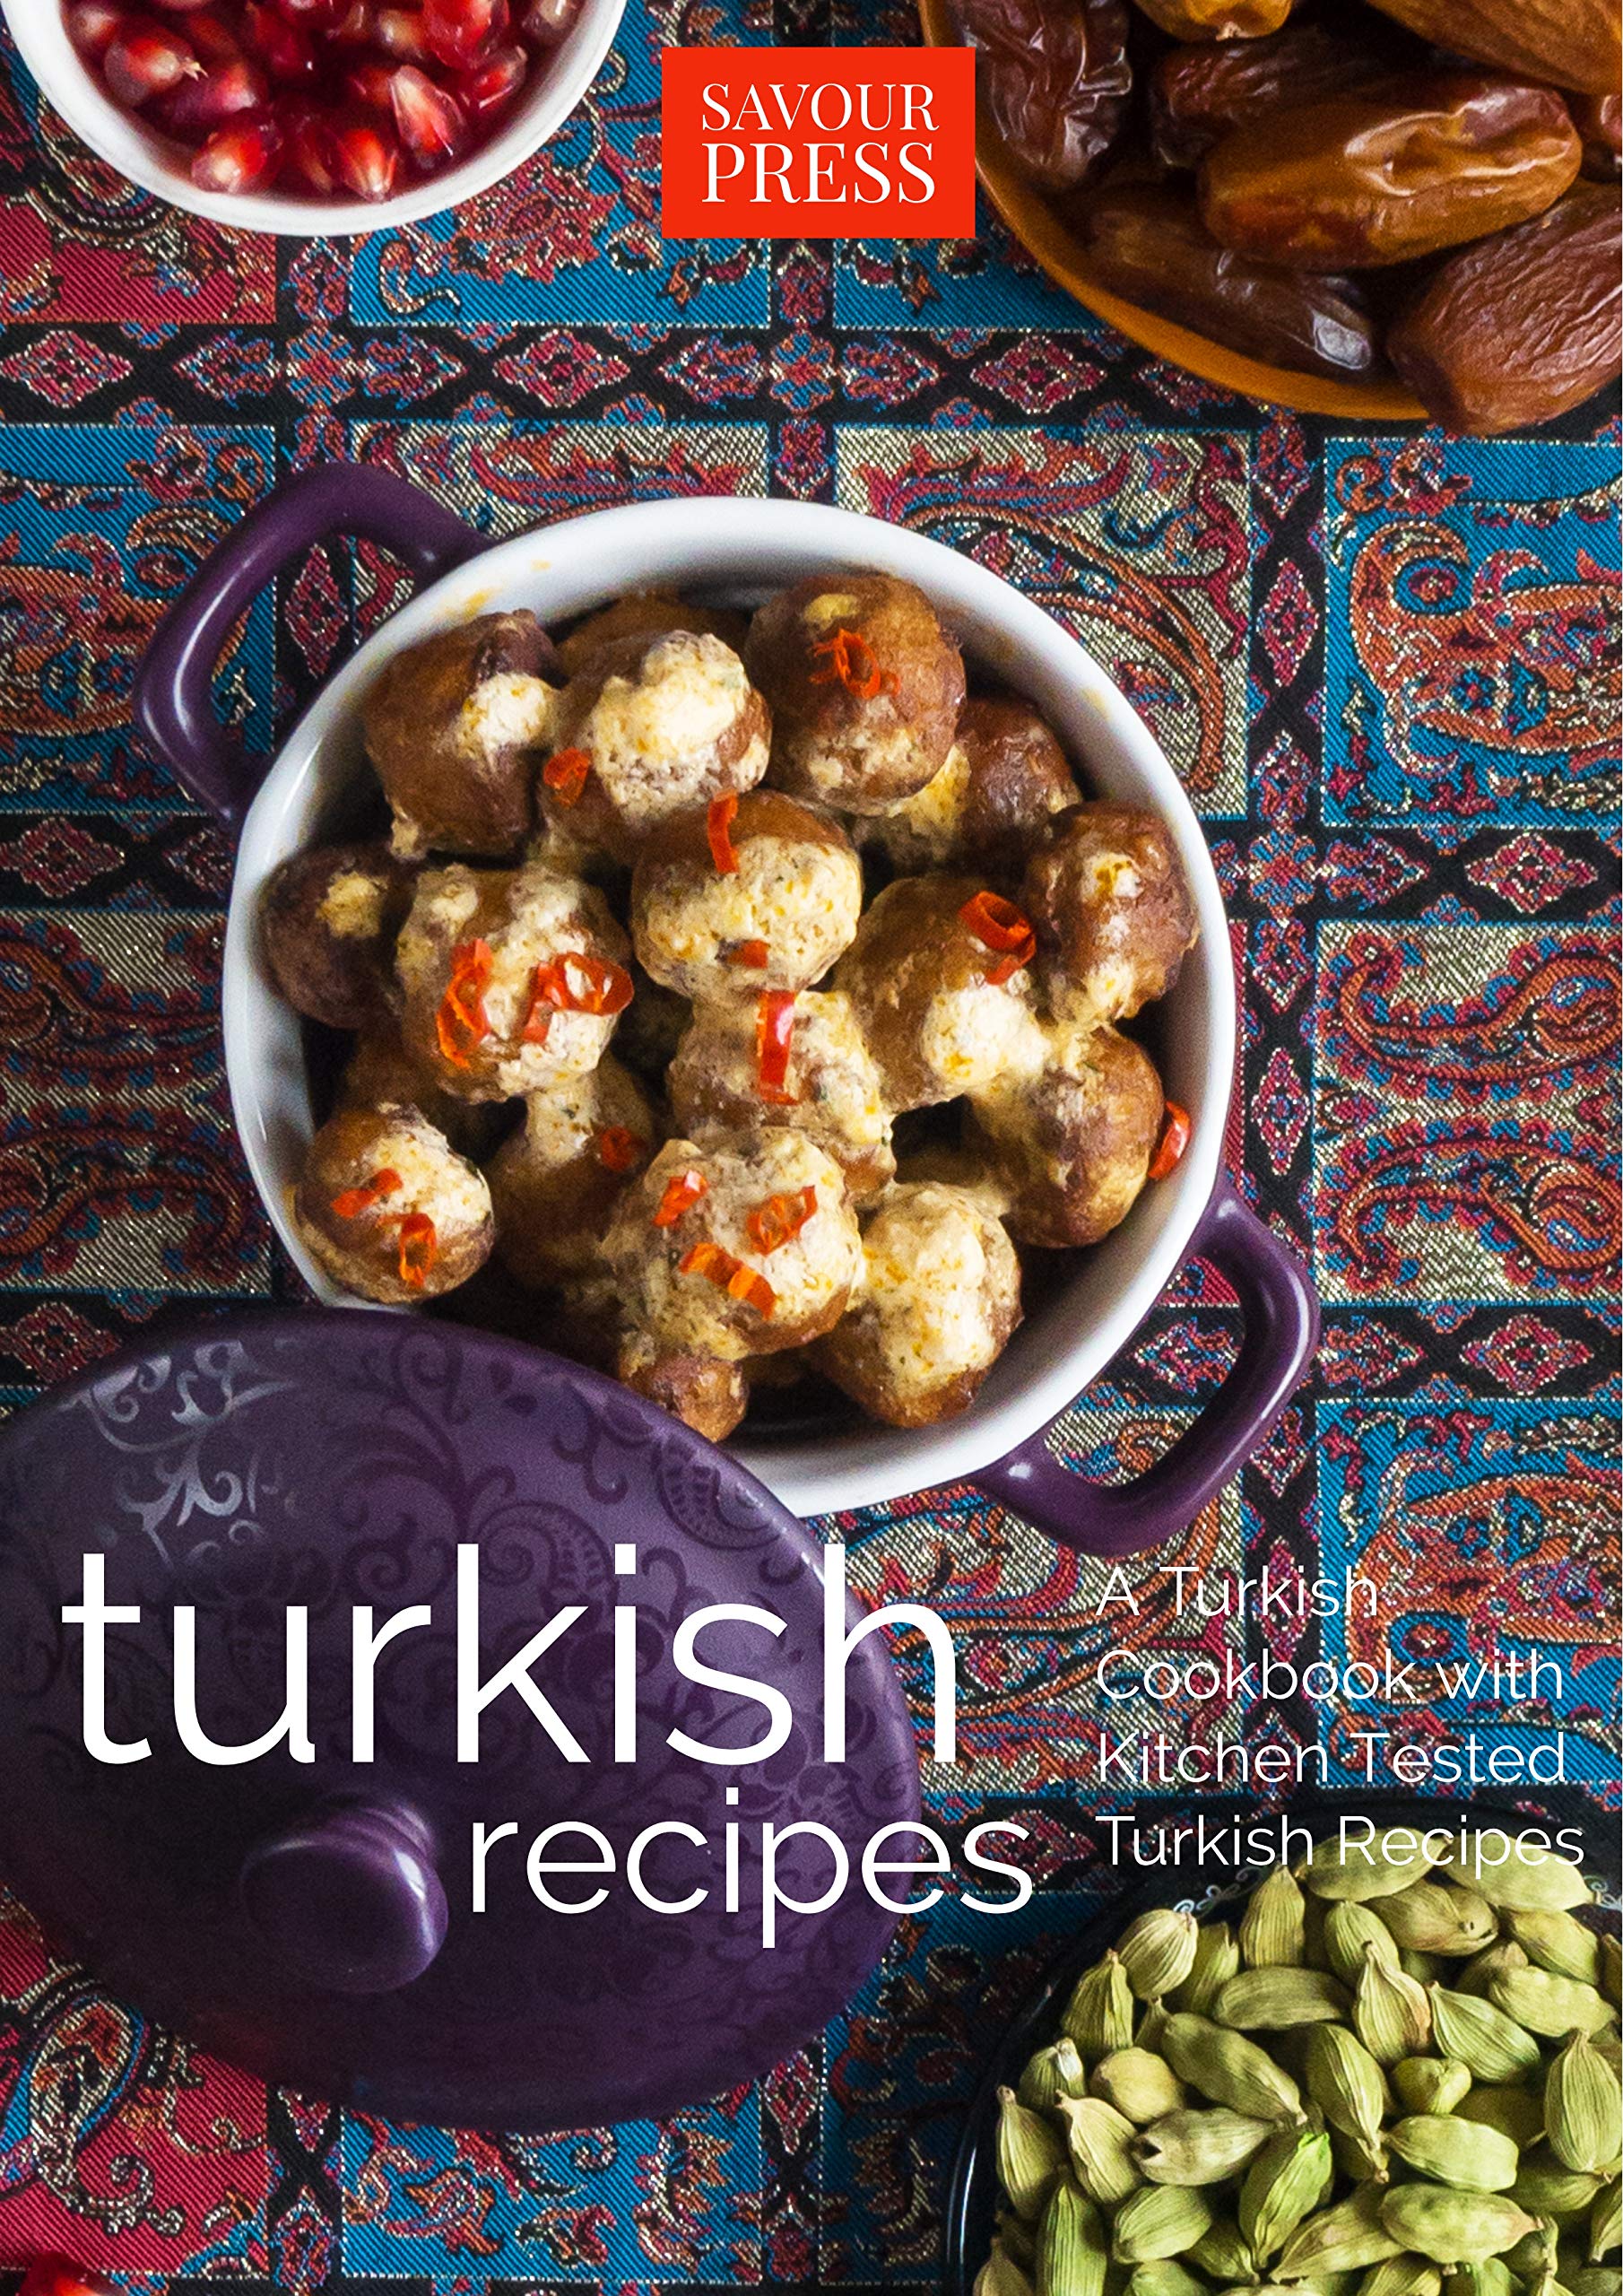 Book Cover Turkish Recipes!: A Turkish Cookbook with Kitchen Tested Turkish Recipes